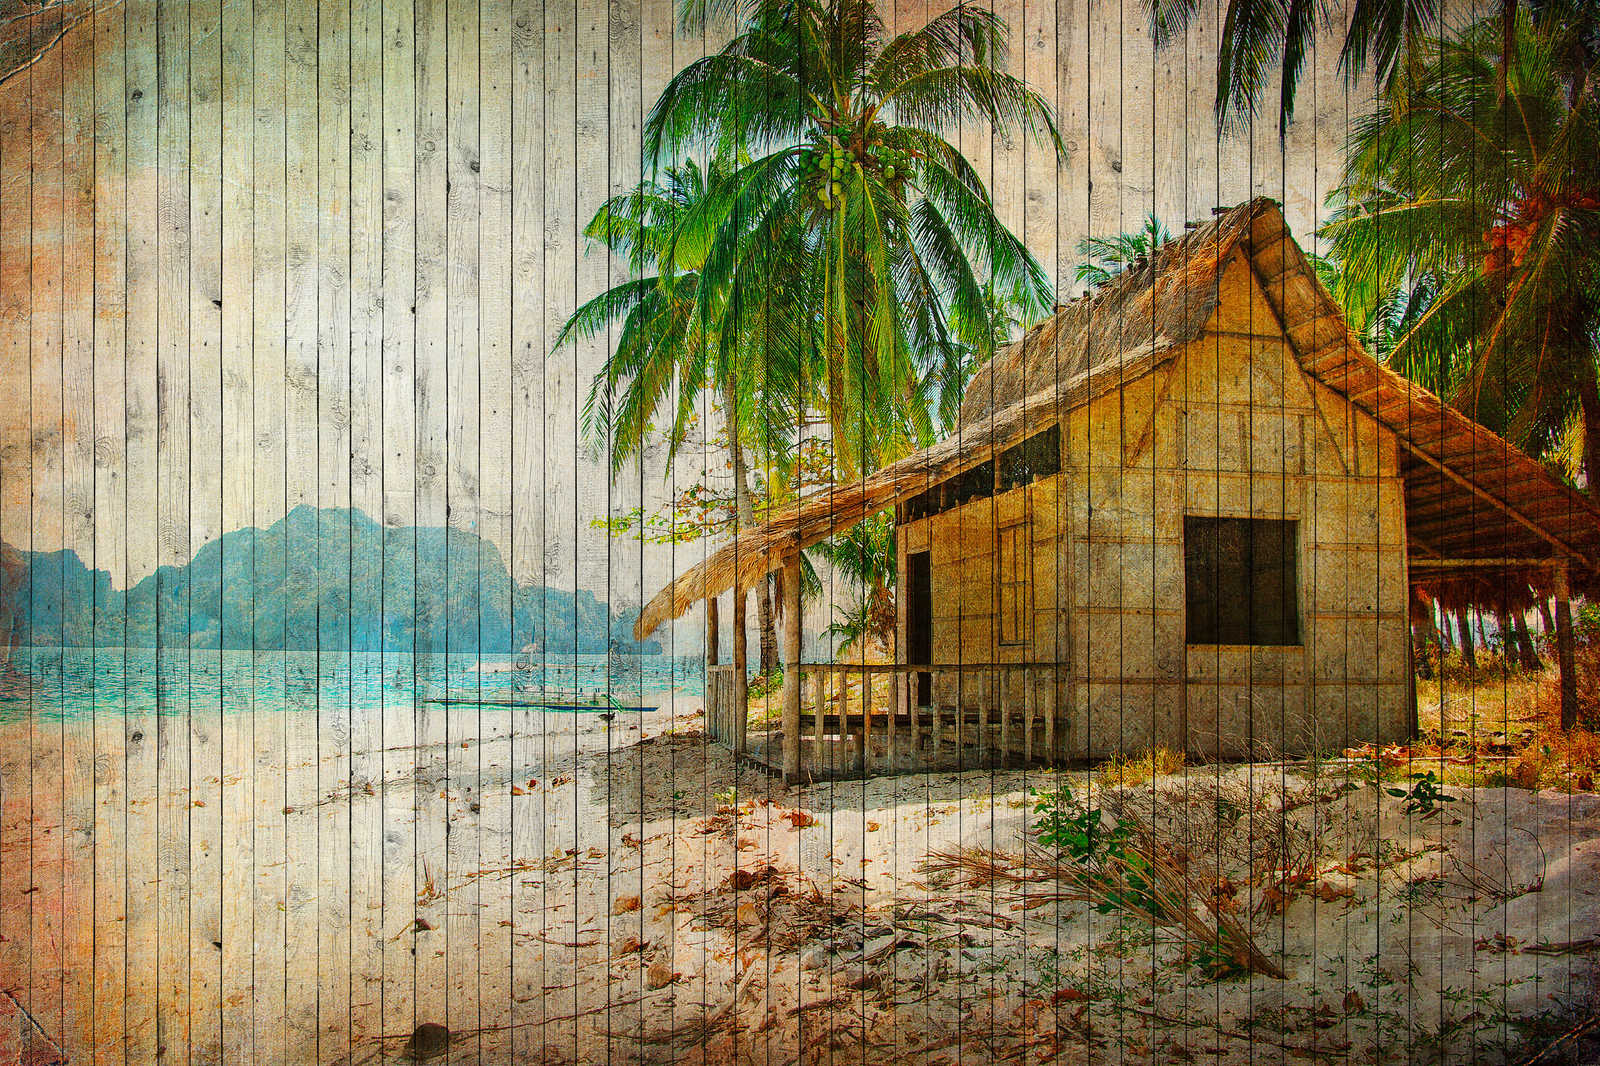             Tahiti 1 - South Seas beach canvas picture with board optics in wood panel - 0.90 m x 0.60 m
        